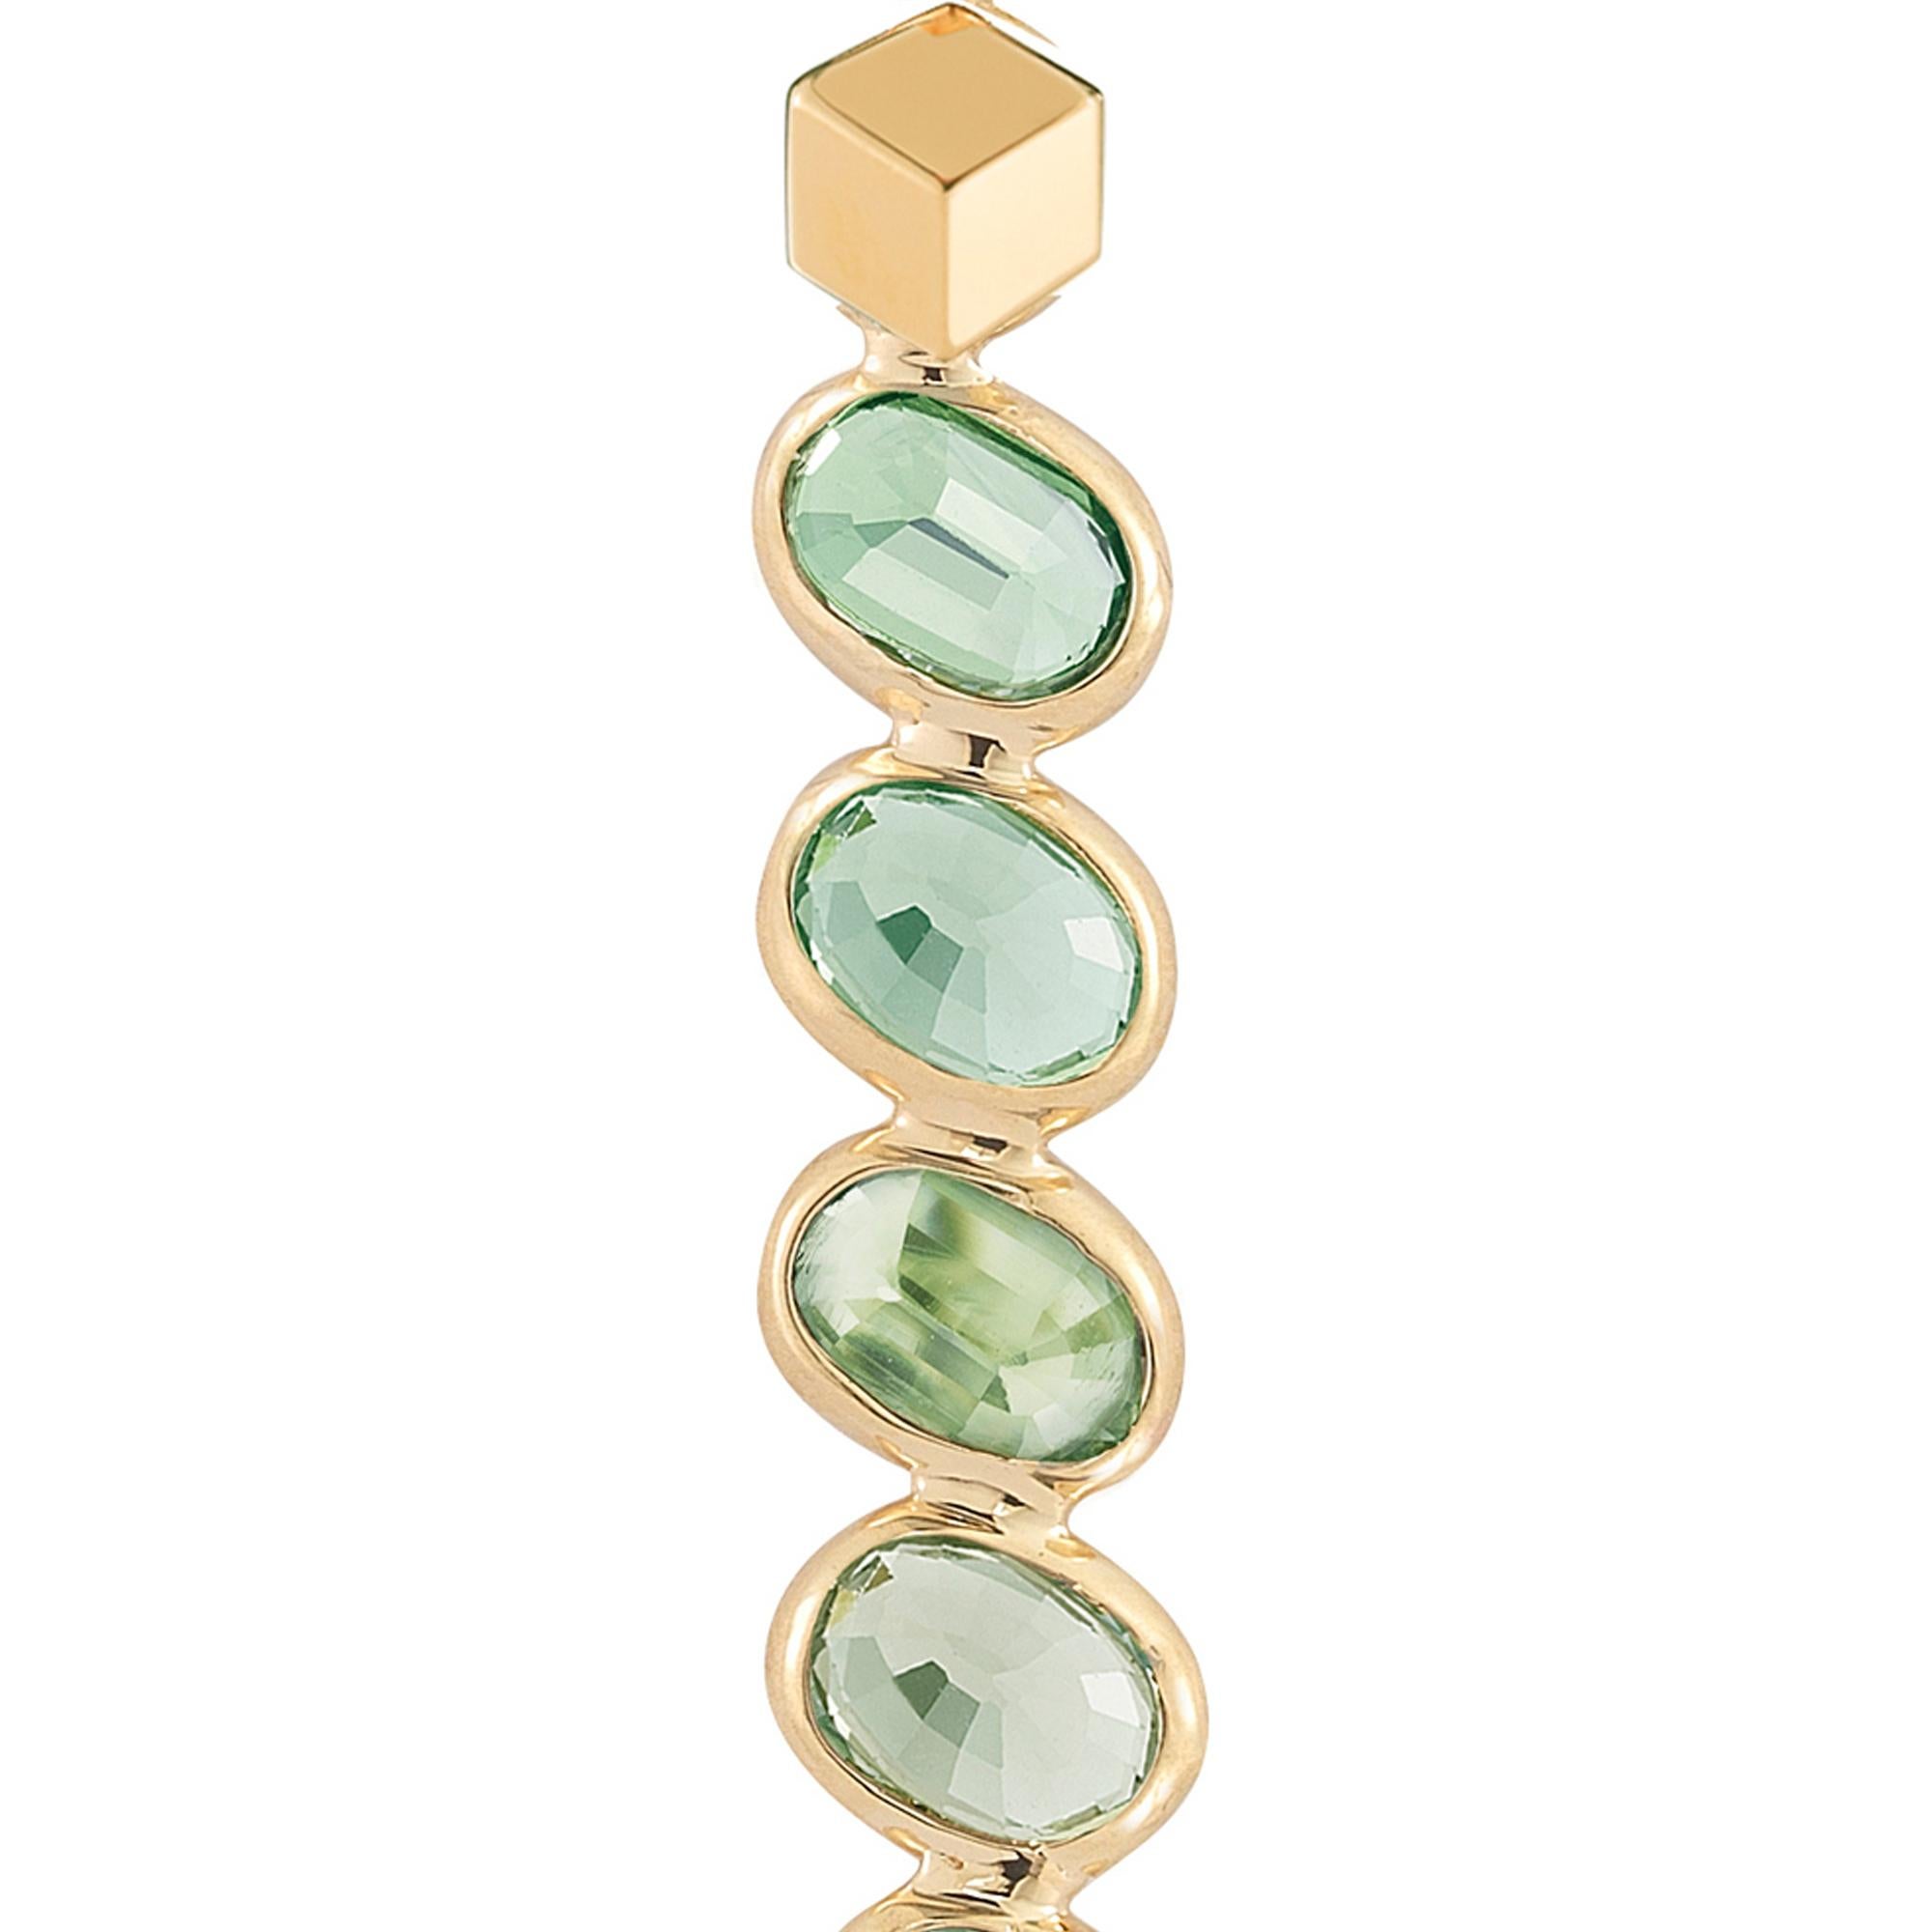 Round Cut Paolo Costagli 18 Karat Yellow Gold Green Sapphires Ombré Pendant Necklace For Sale